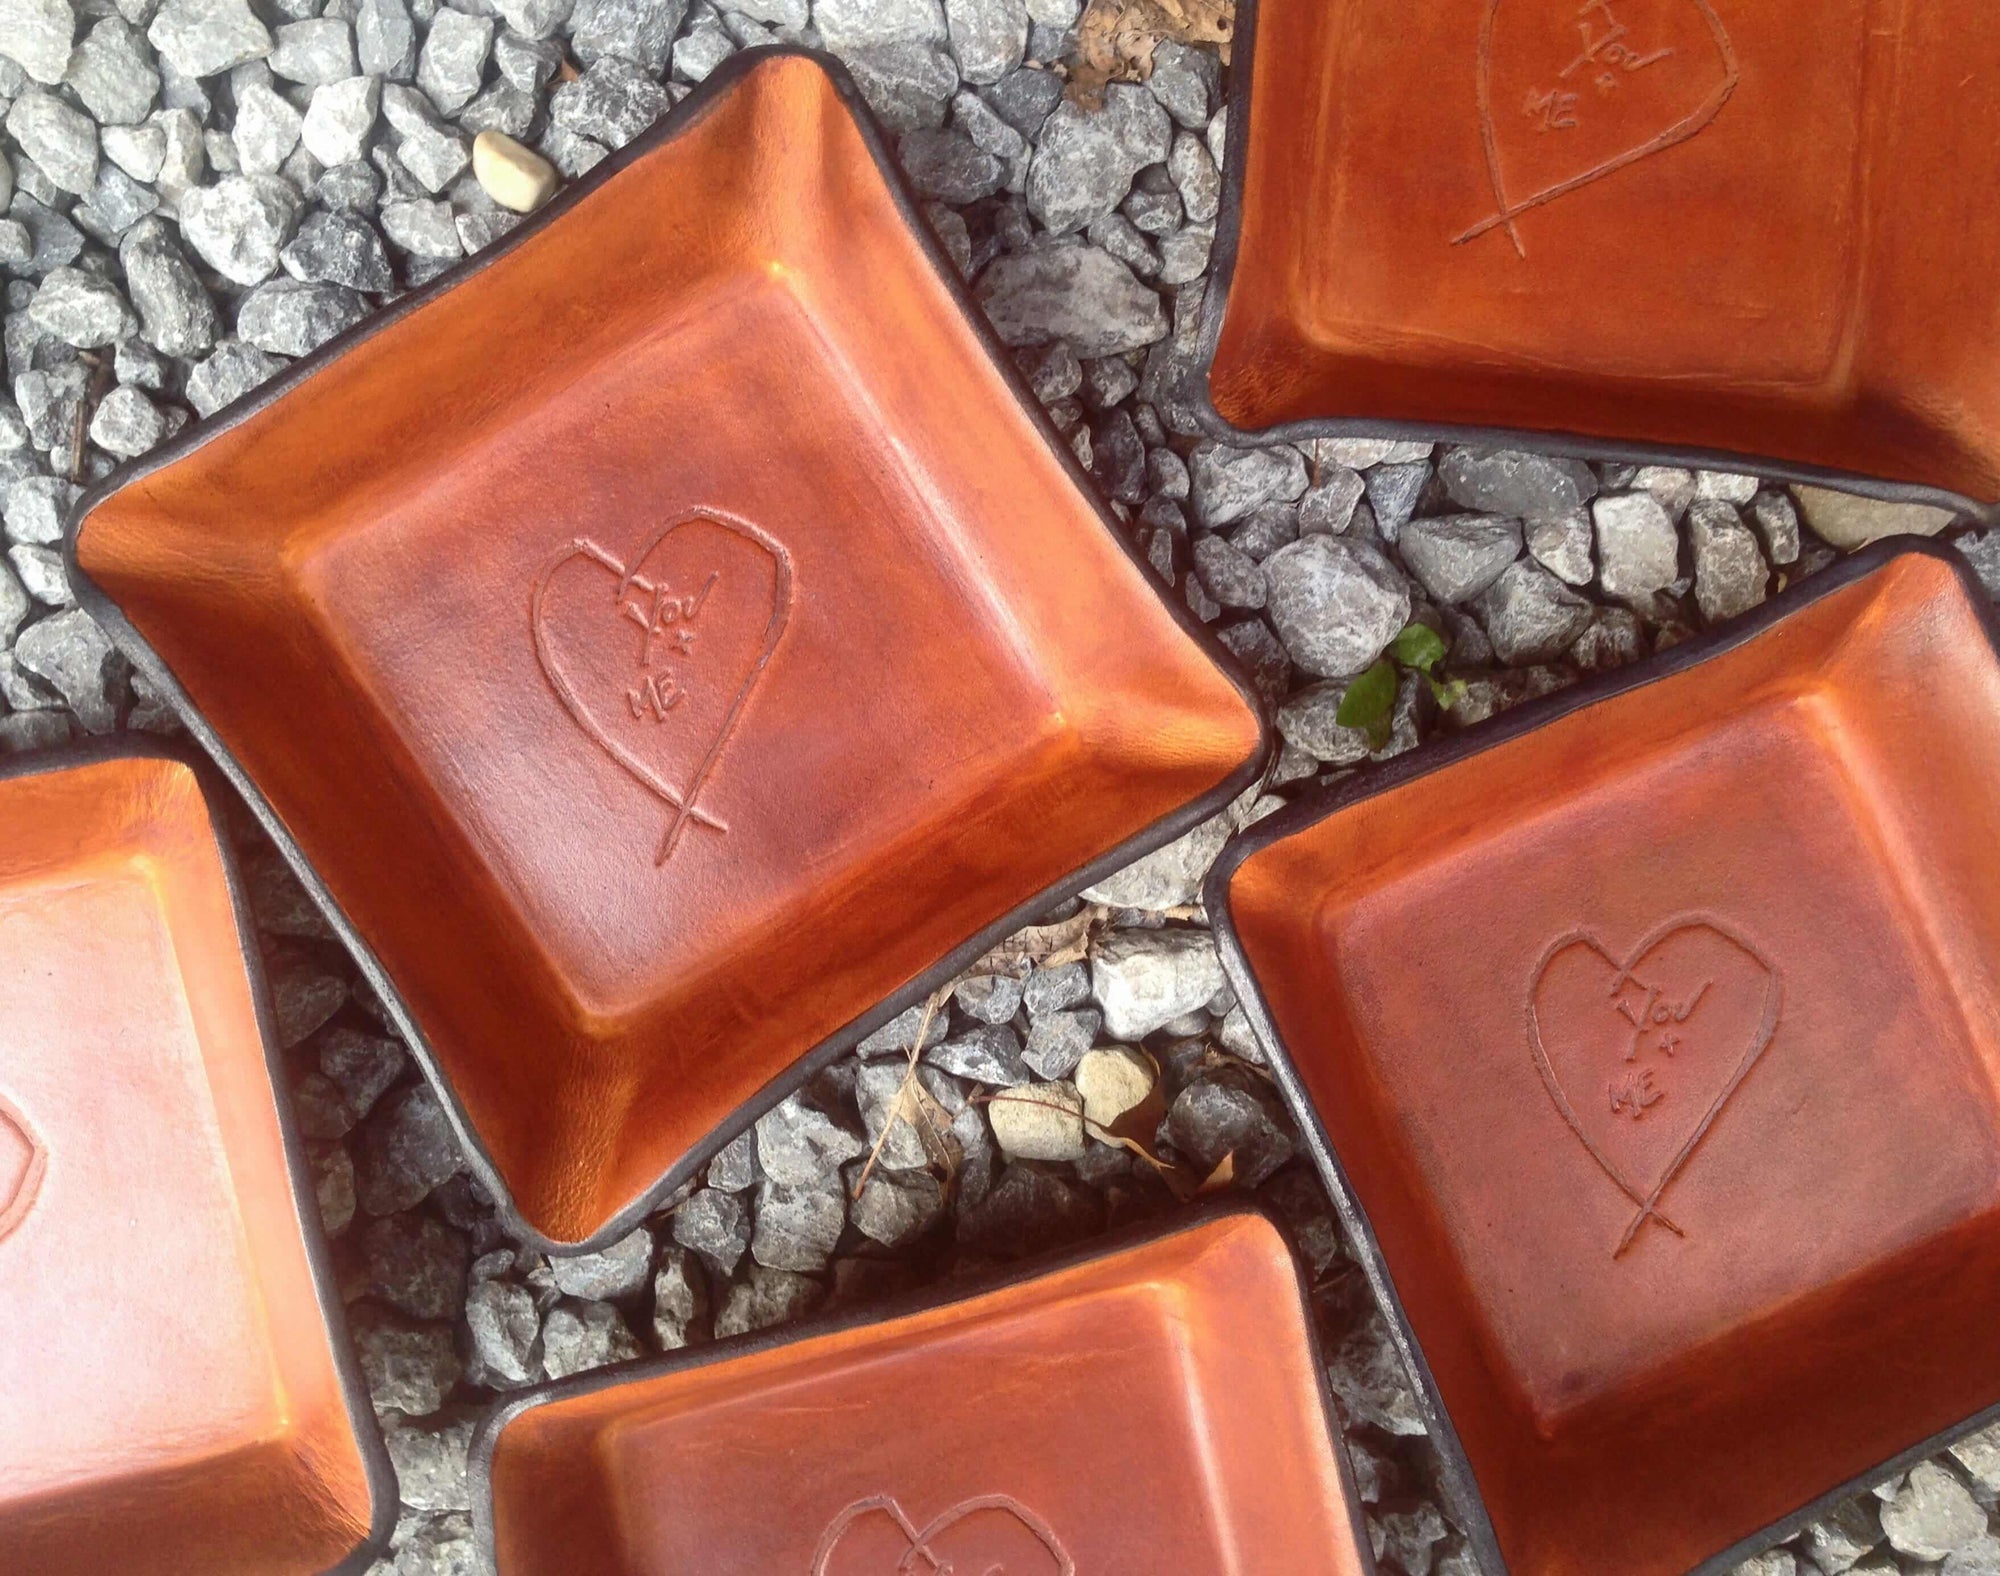 Third anniversary leather gift trays with heart detail